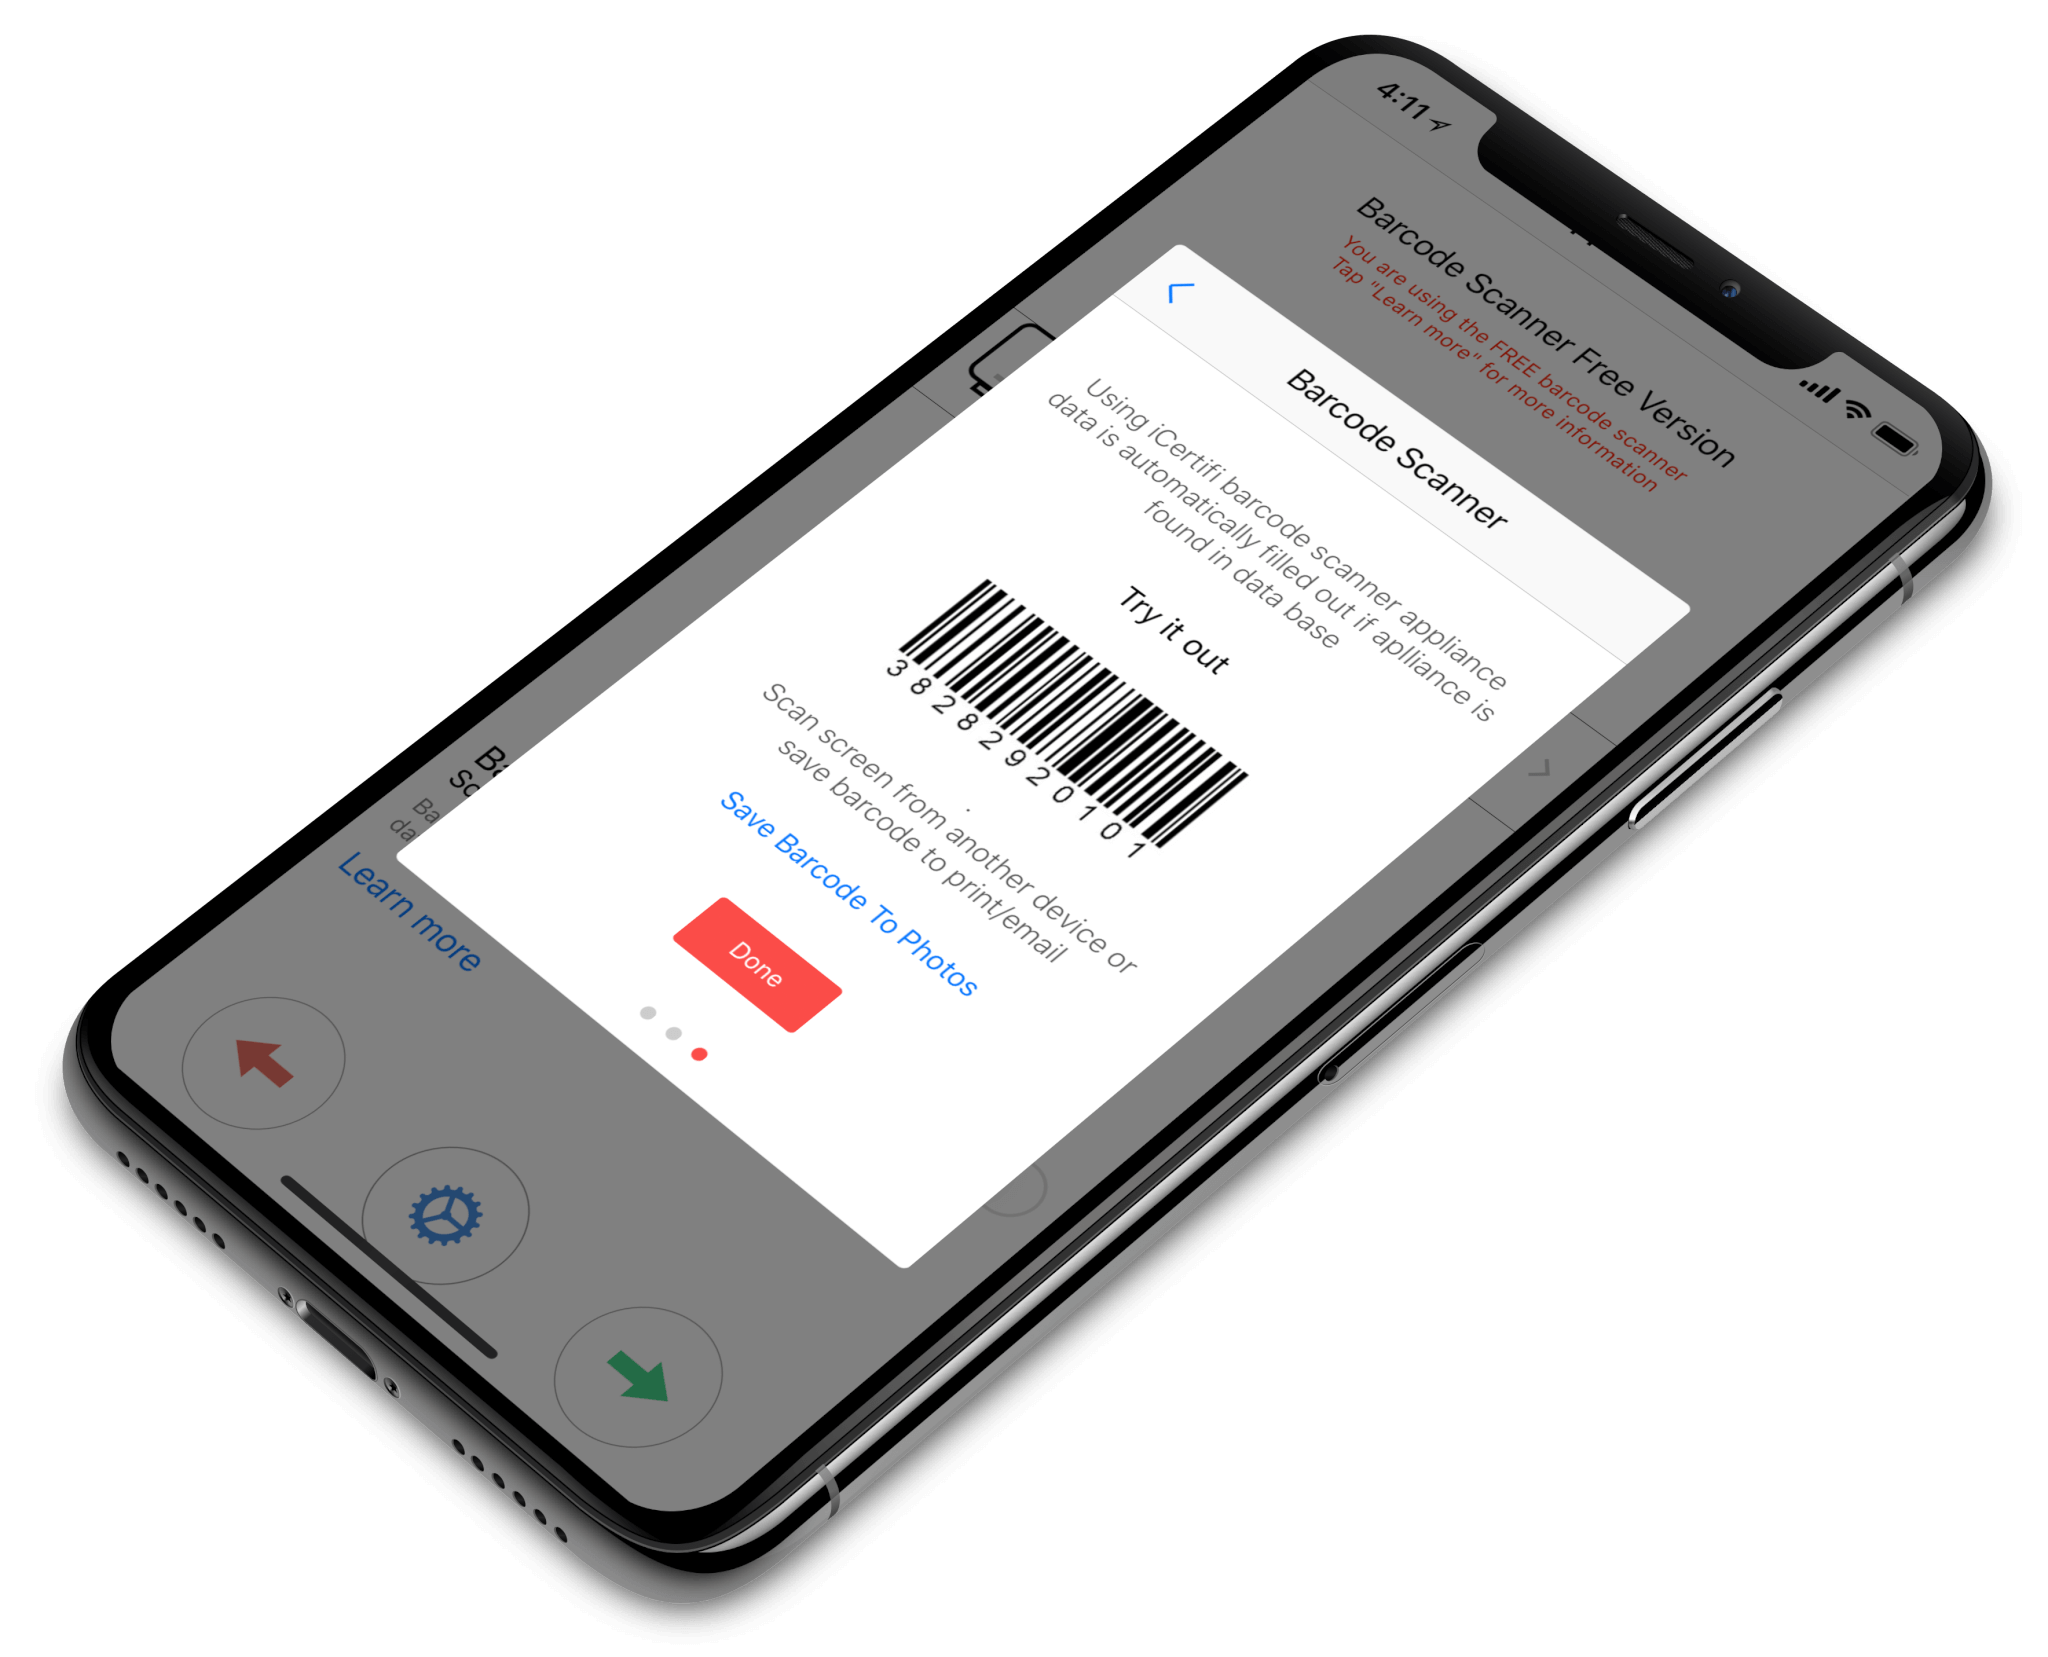 PAT Testing barcode scanner on iPhone